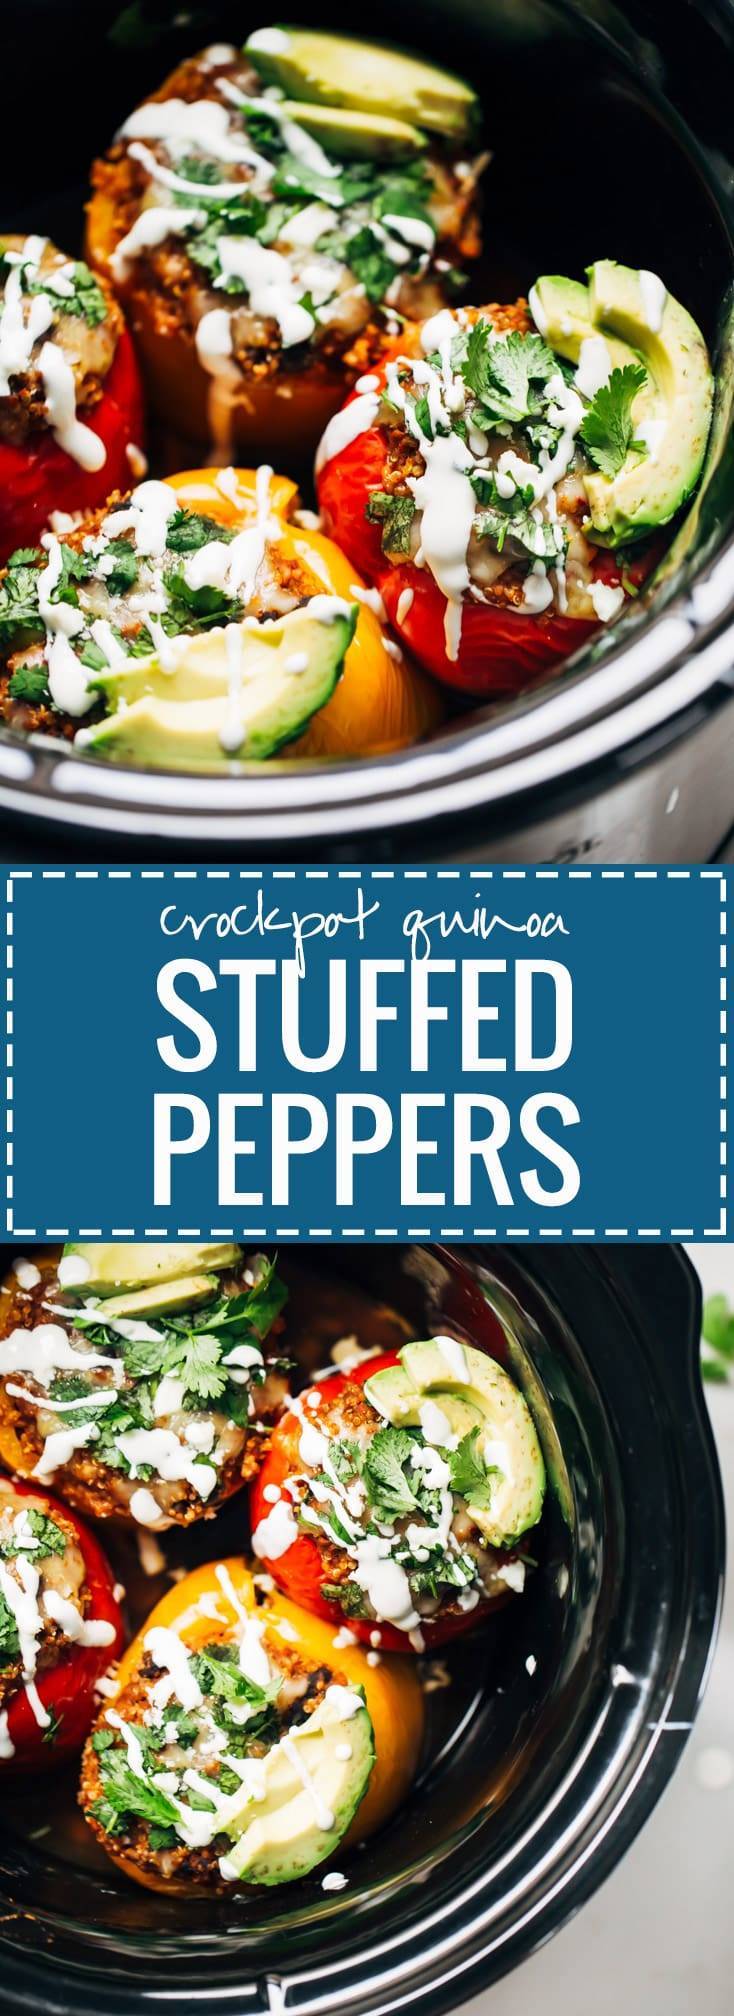 Quinoa Black Bean Crockpot Stuffed Peppers - healthy, vegetarian, easy to prep, and DELICIOUS.